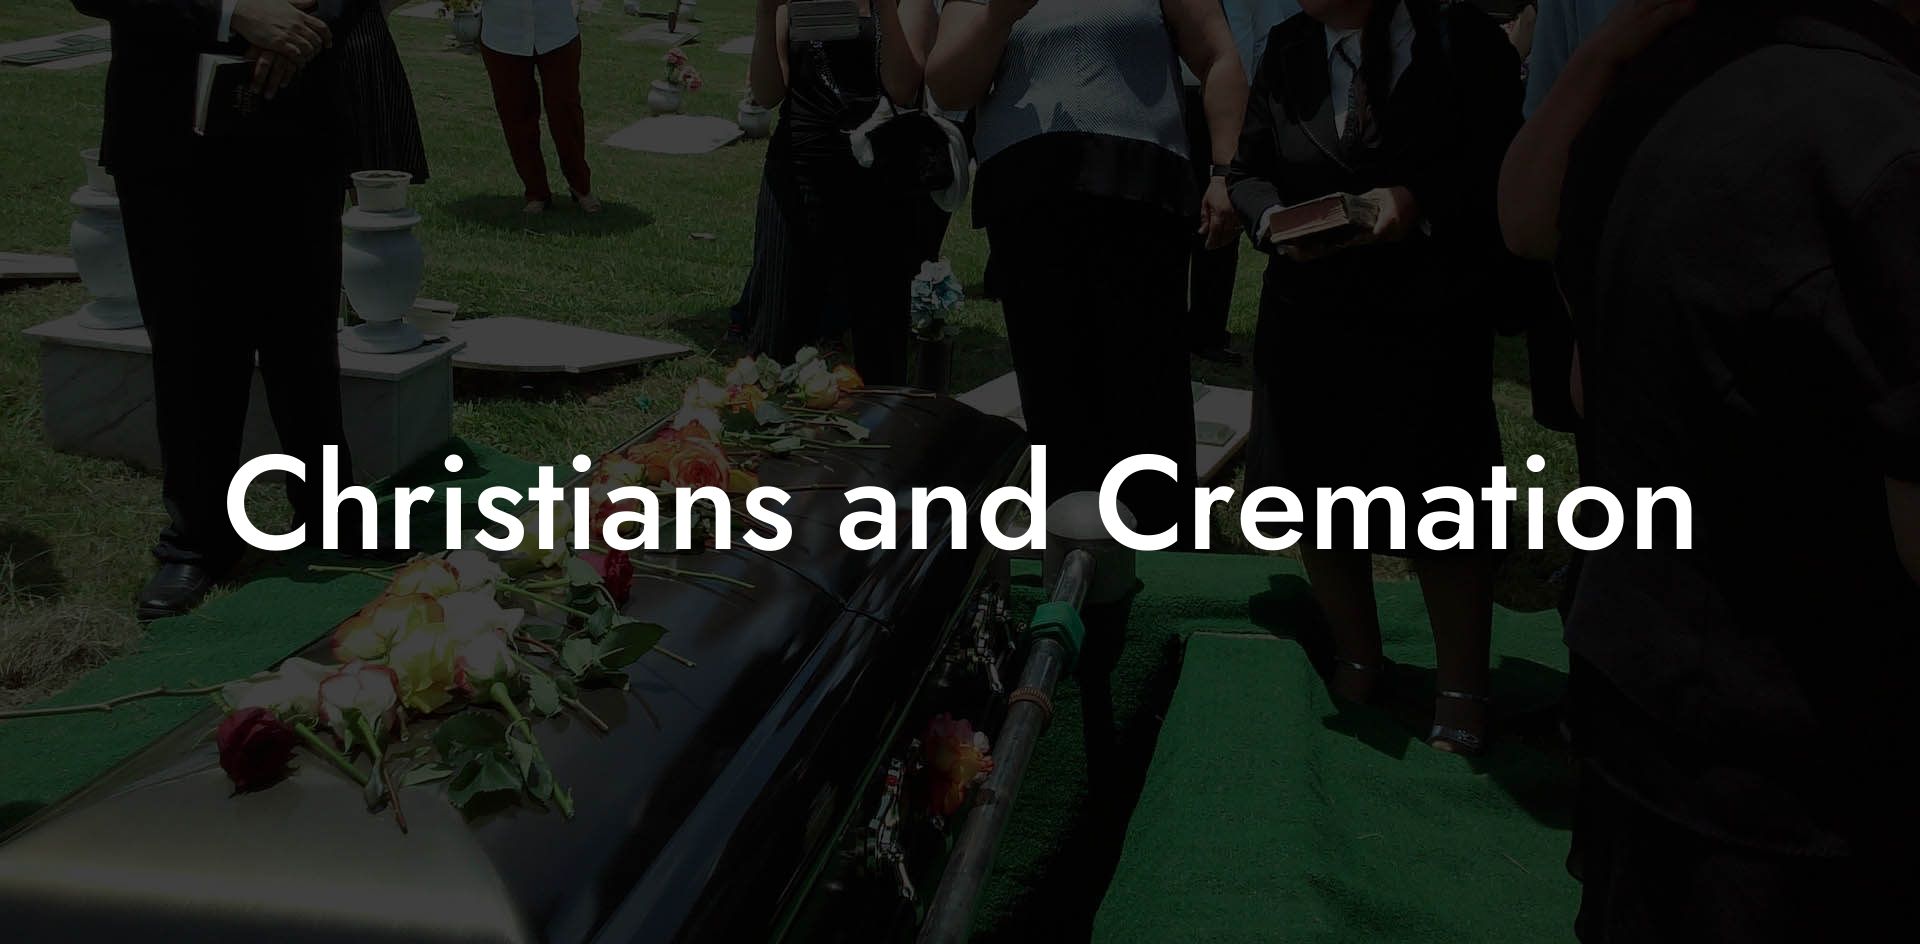 Christians and Cremation